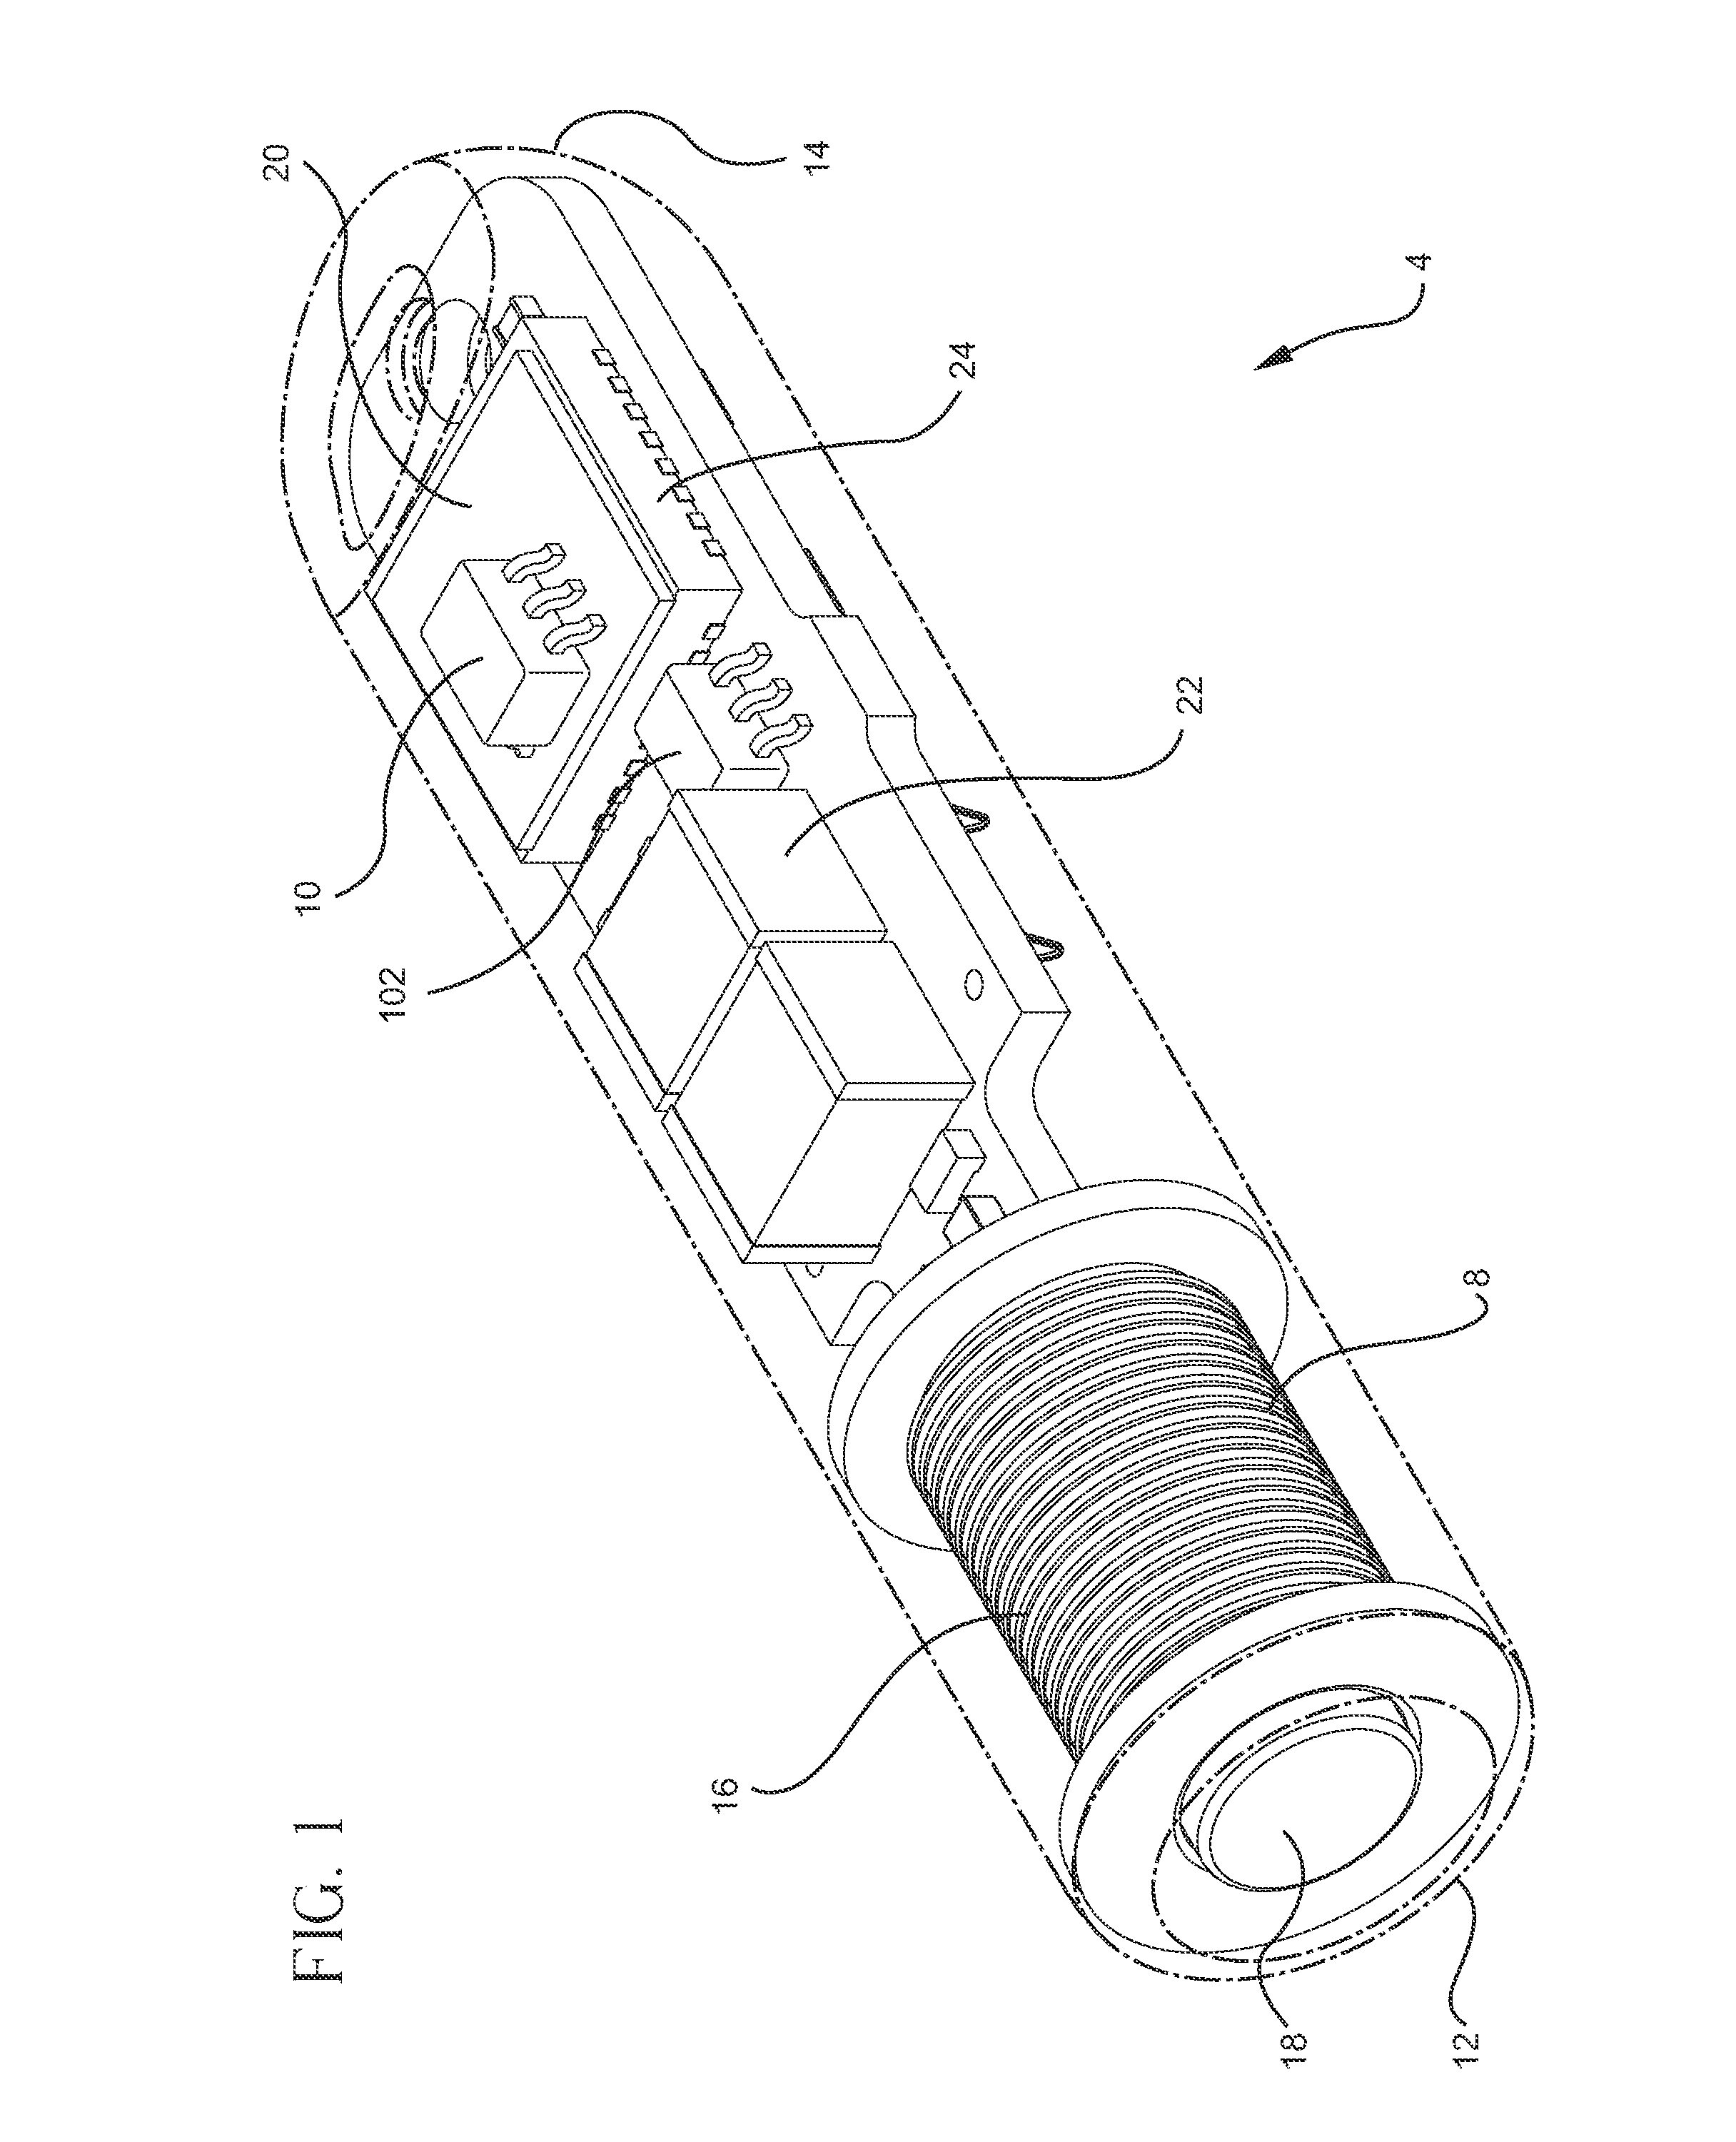 System and method for urodynamic evaluation utilizing micro electro-mechanical system technology